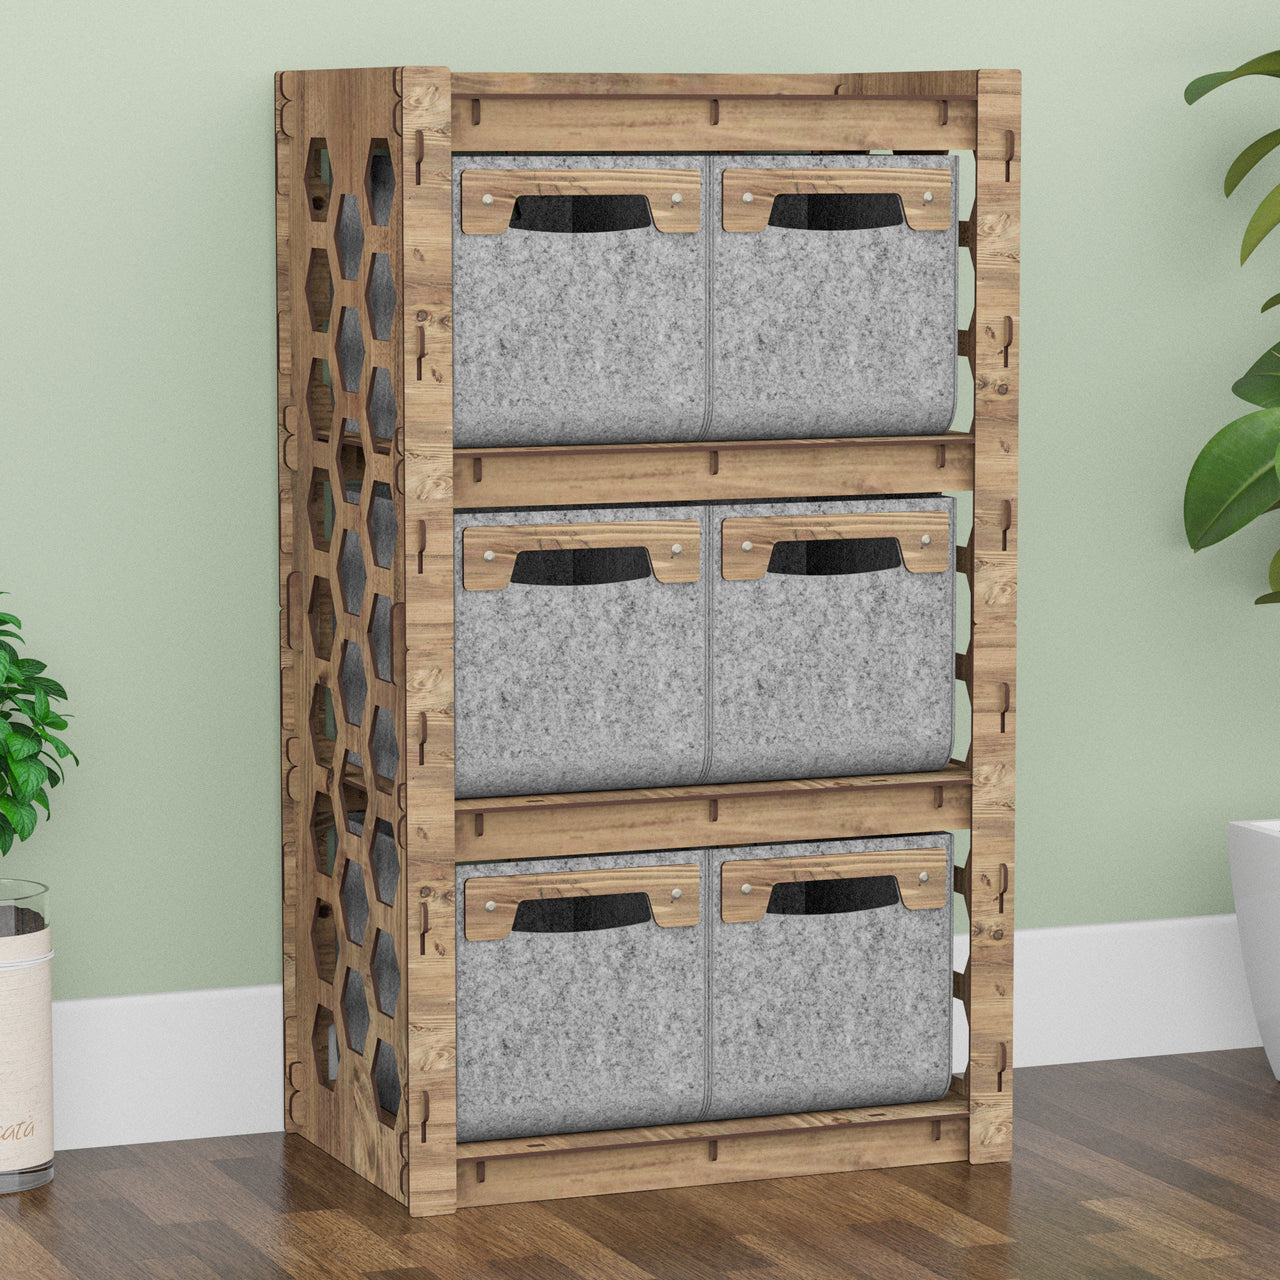 Honeycomb Chest Of 6 Drawers Storage Cabinet [6 SMALL GRAY BINS